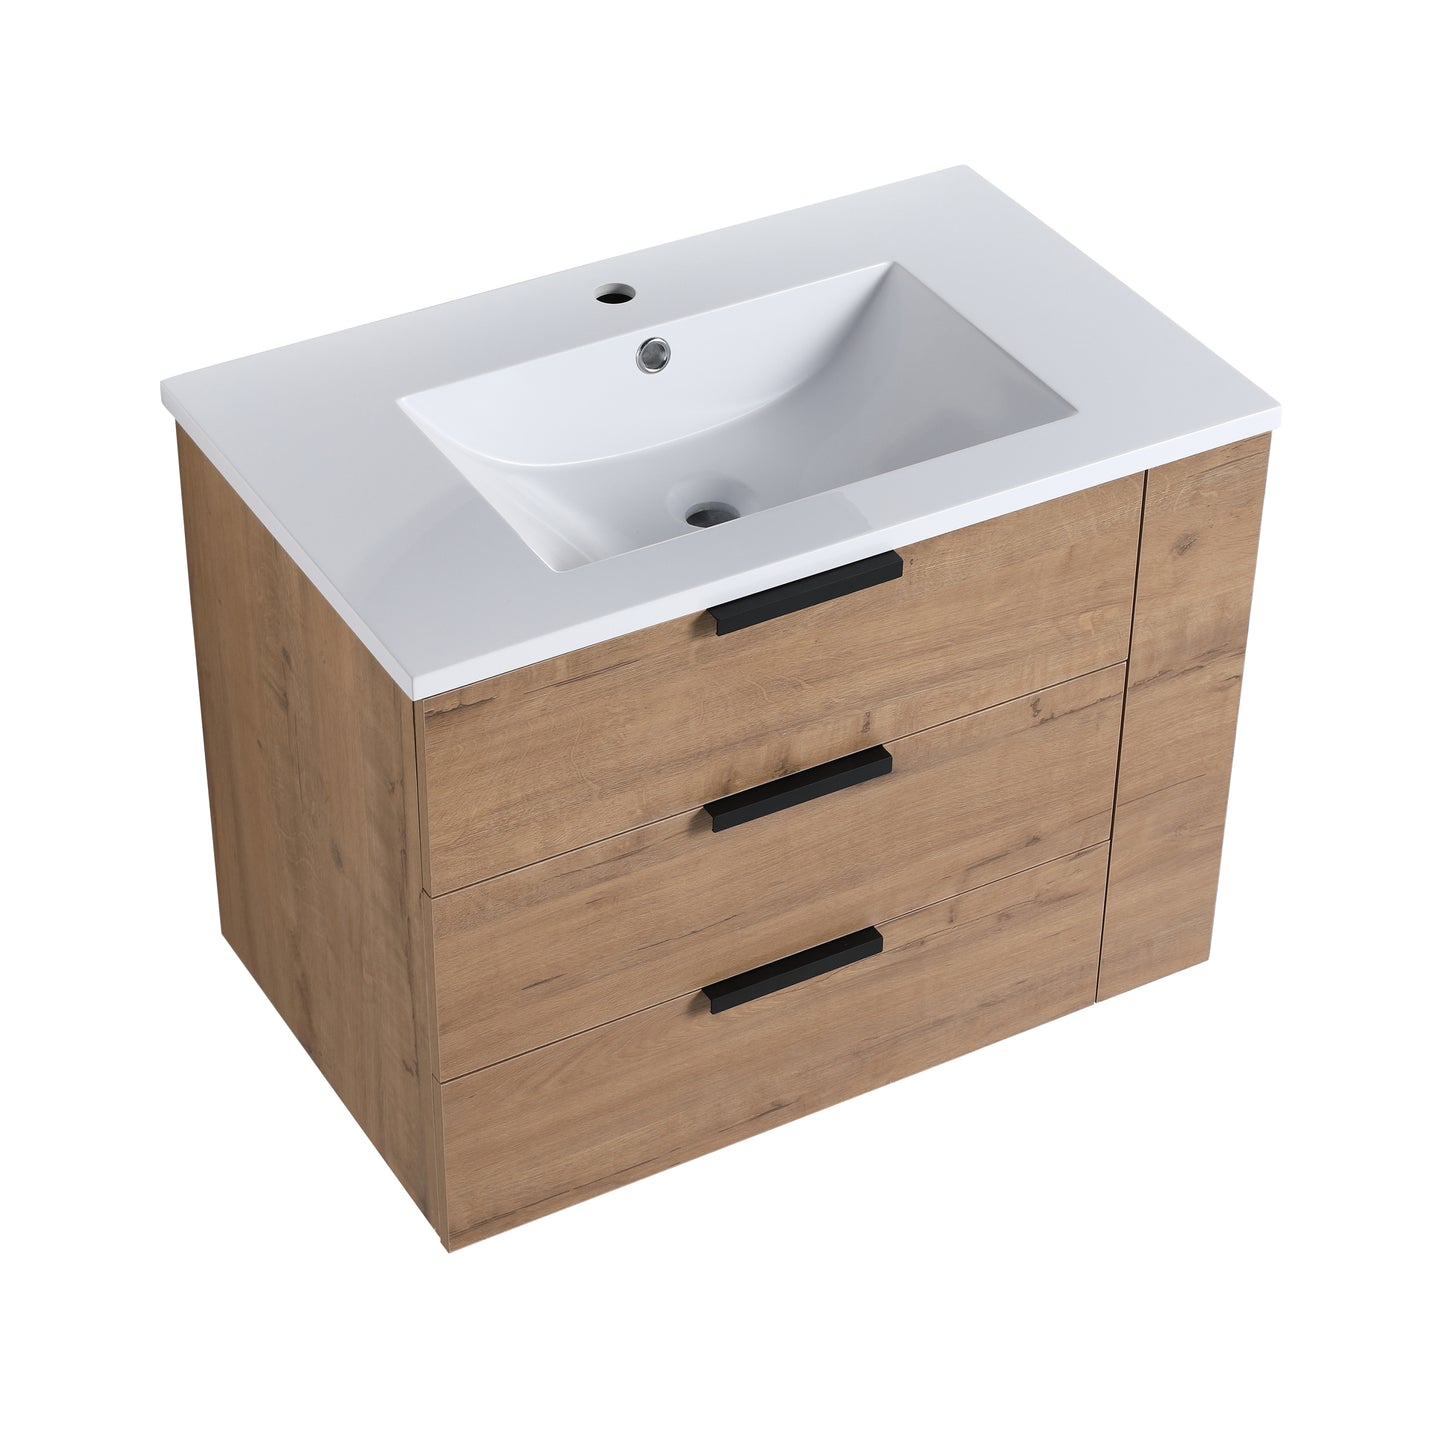 30 Inch Bathroom Vanity Without Top   (Only Vanity )